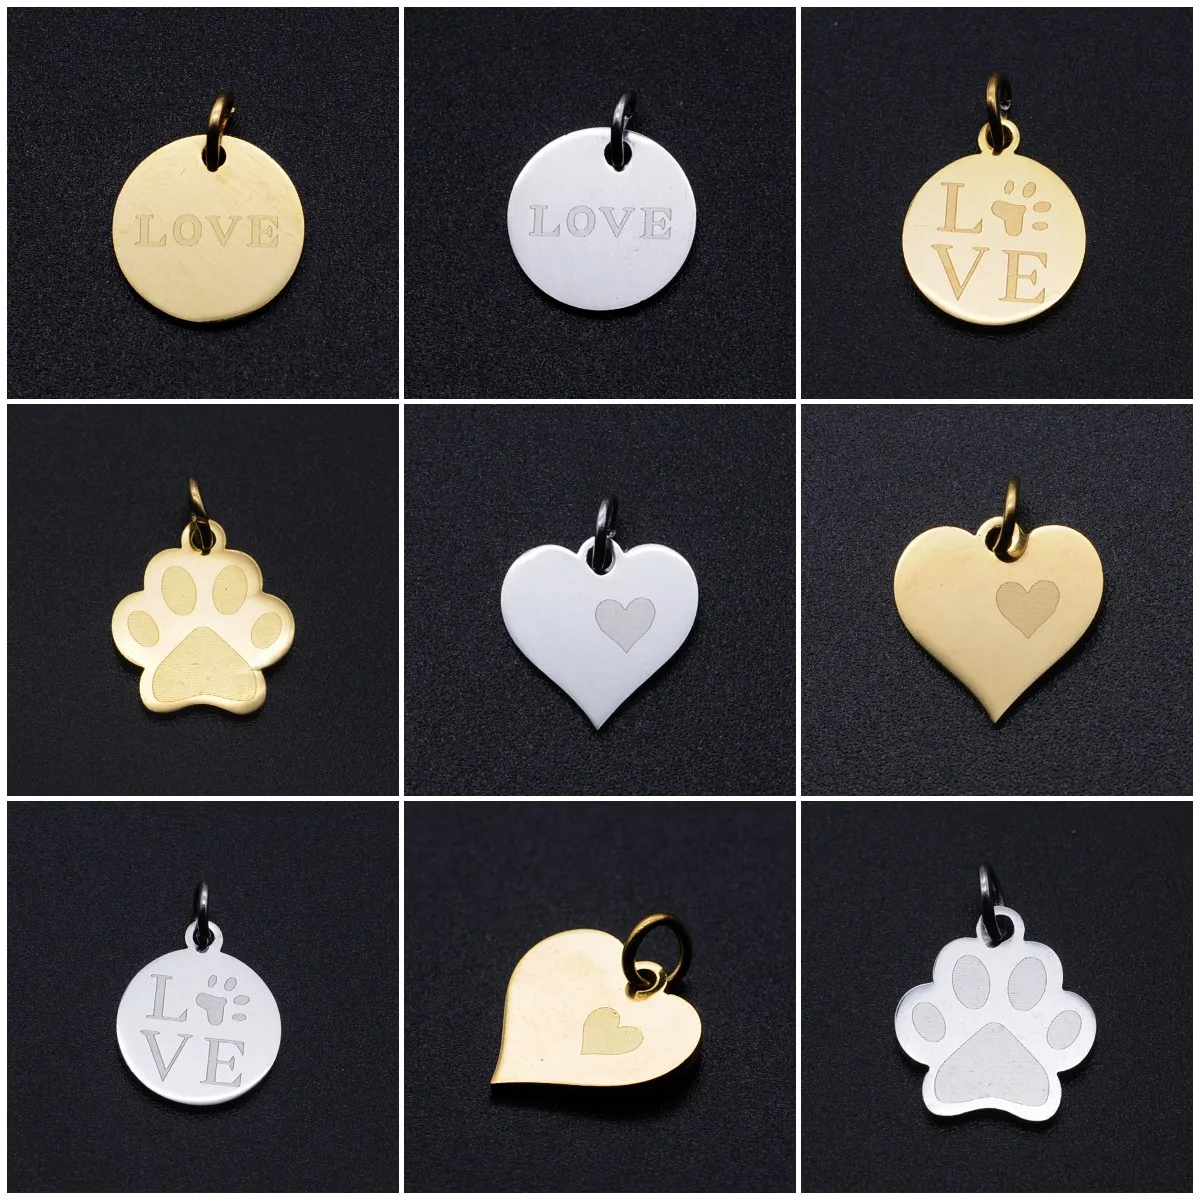 

5Pcs 100% Stainless Steel Polished Love Heart/Round Shape Tag Pendant Charm For Necklace Jewelry Making Valentine's Day Gift